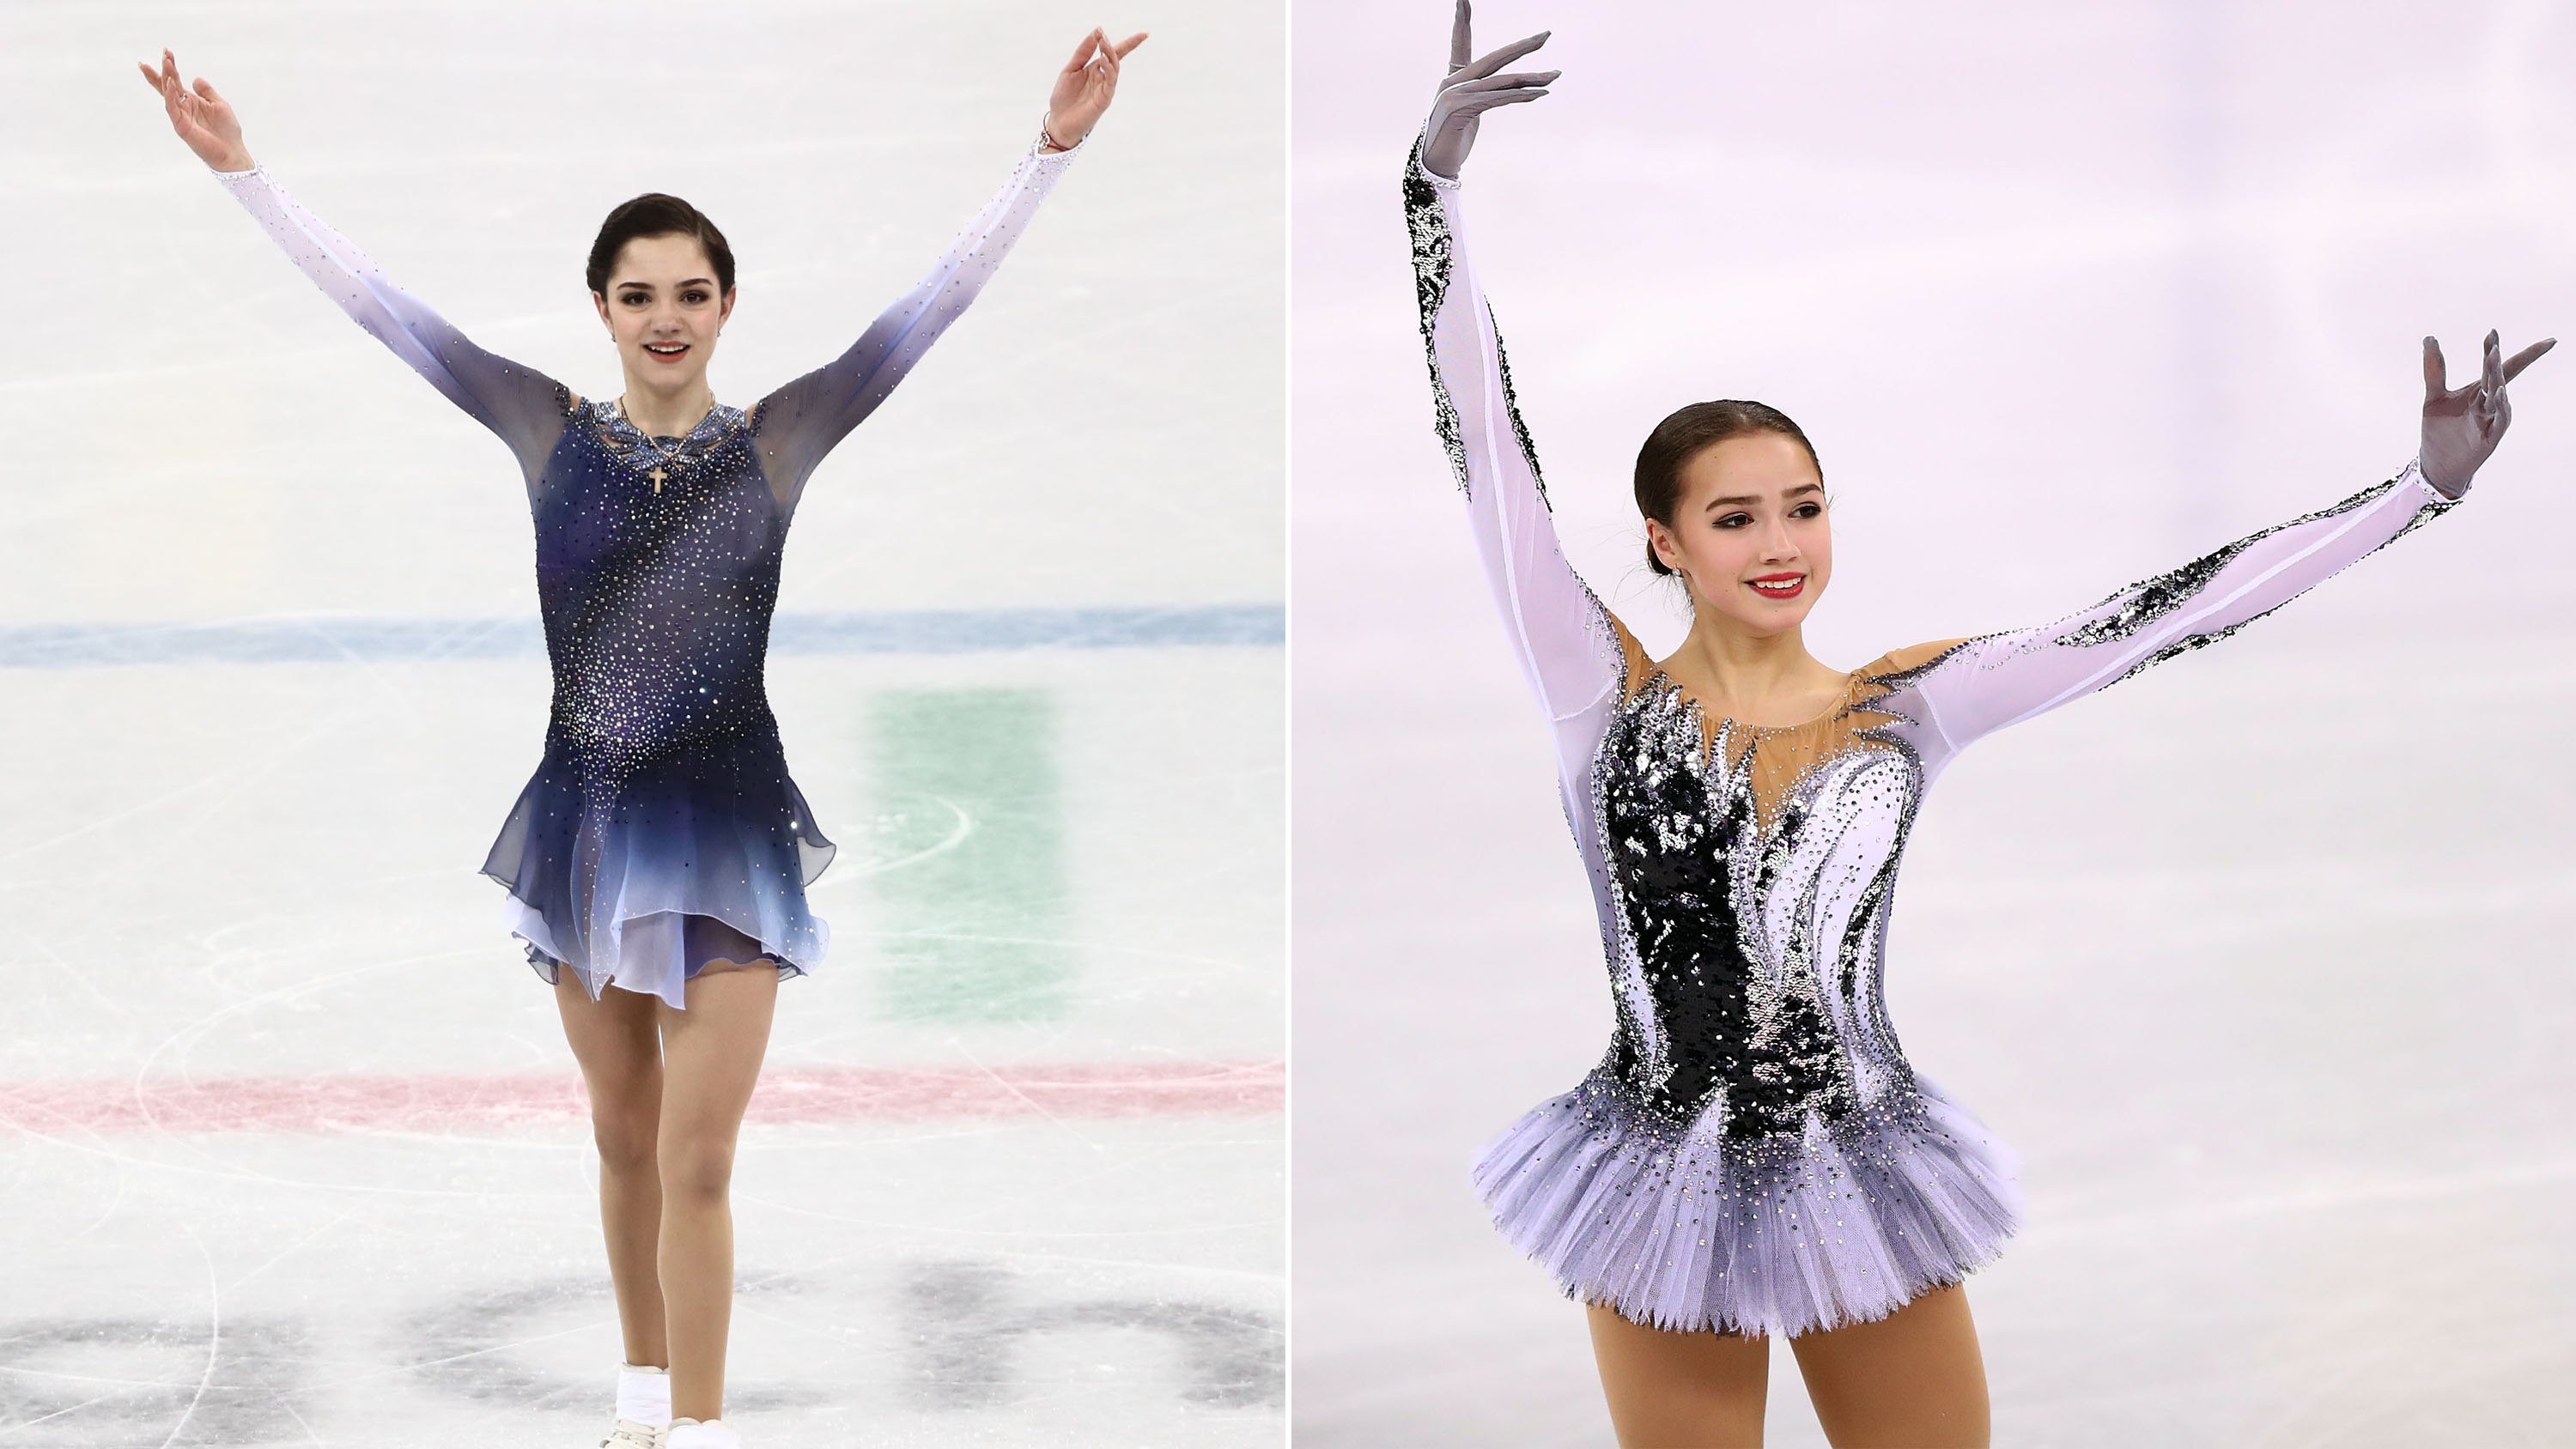 Figure skater Evgenia Medvedeva, Olympic Athlete from Russia, acknowledges the audience after performing during the ladies' short programme as part of the figure skating competition at the 2018 Winter Olympic Games; lina Zagitova of Russia competes during the Ladies Single Skating Short Program on day twelve of the PyeongChang 2018 Winter Olympic Games at Gangneung Ice Arena on February 21, 2018 (Getty Images(2))